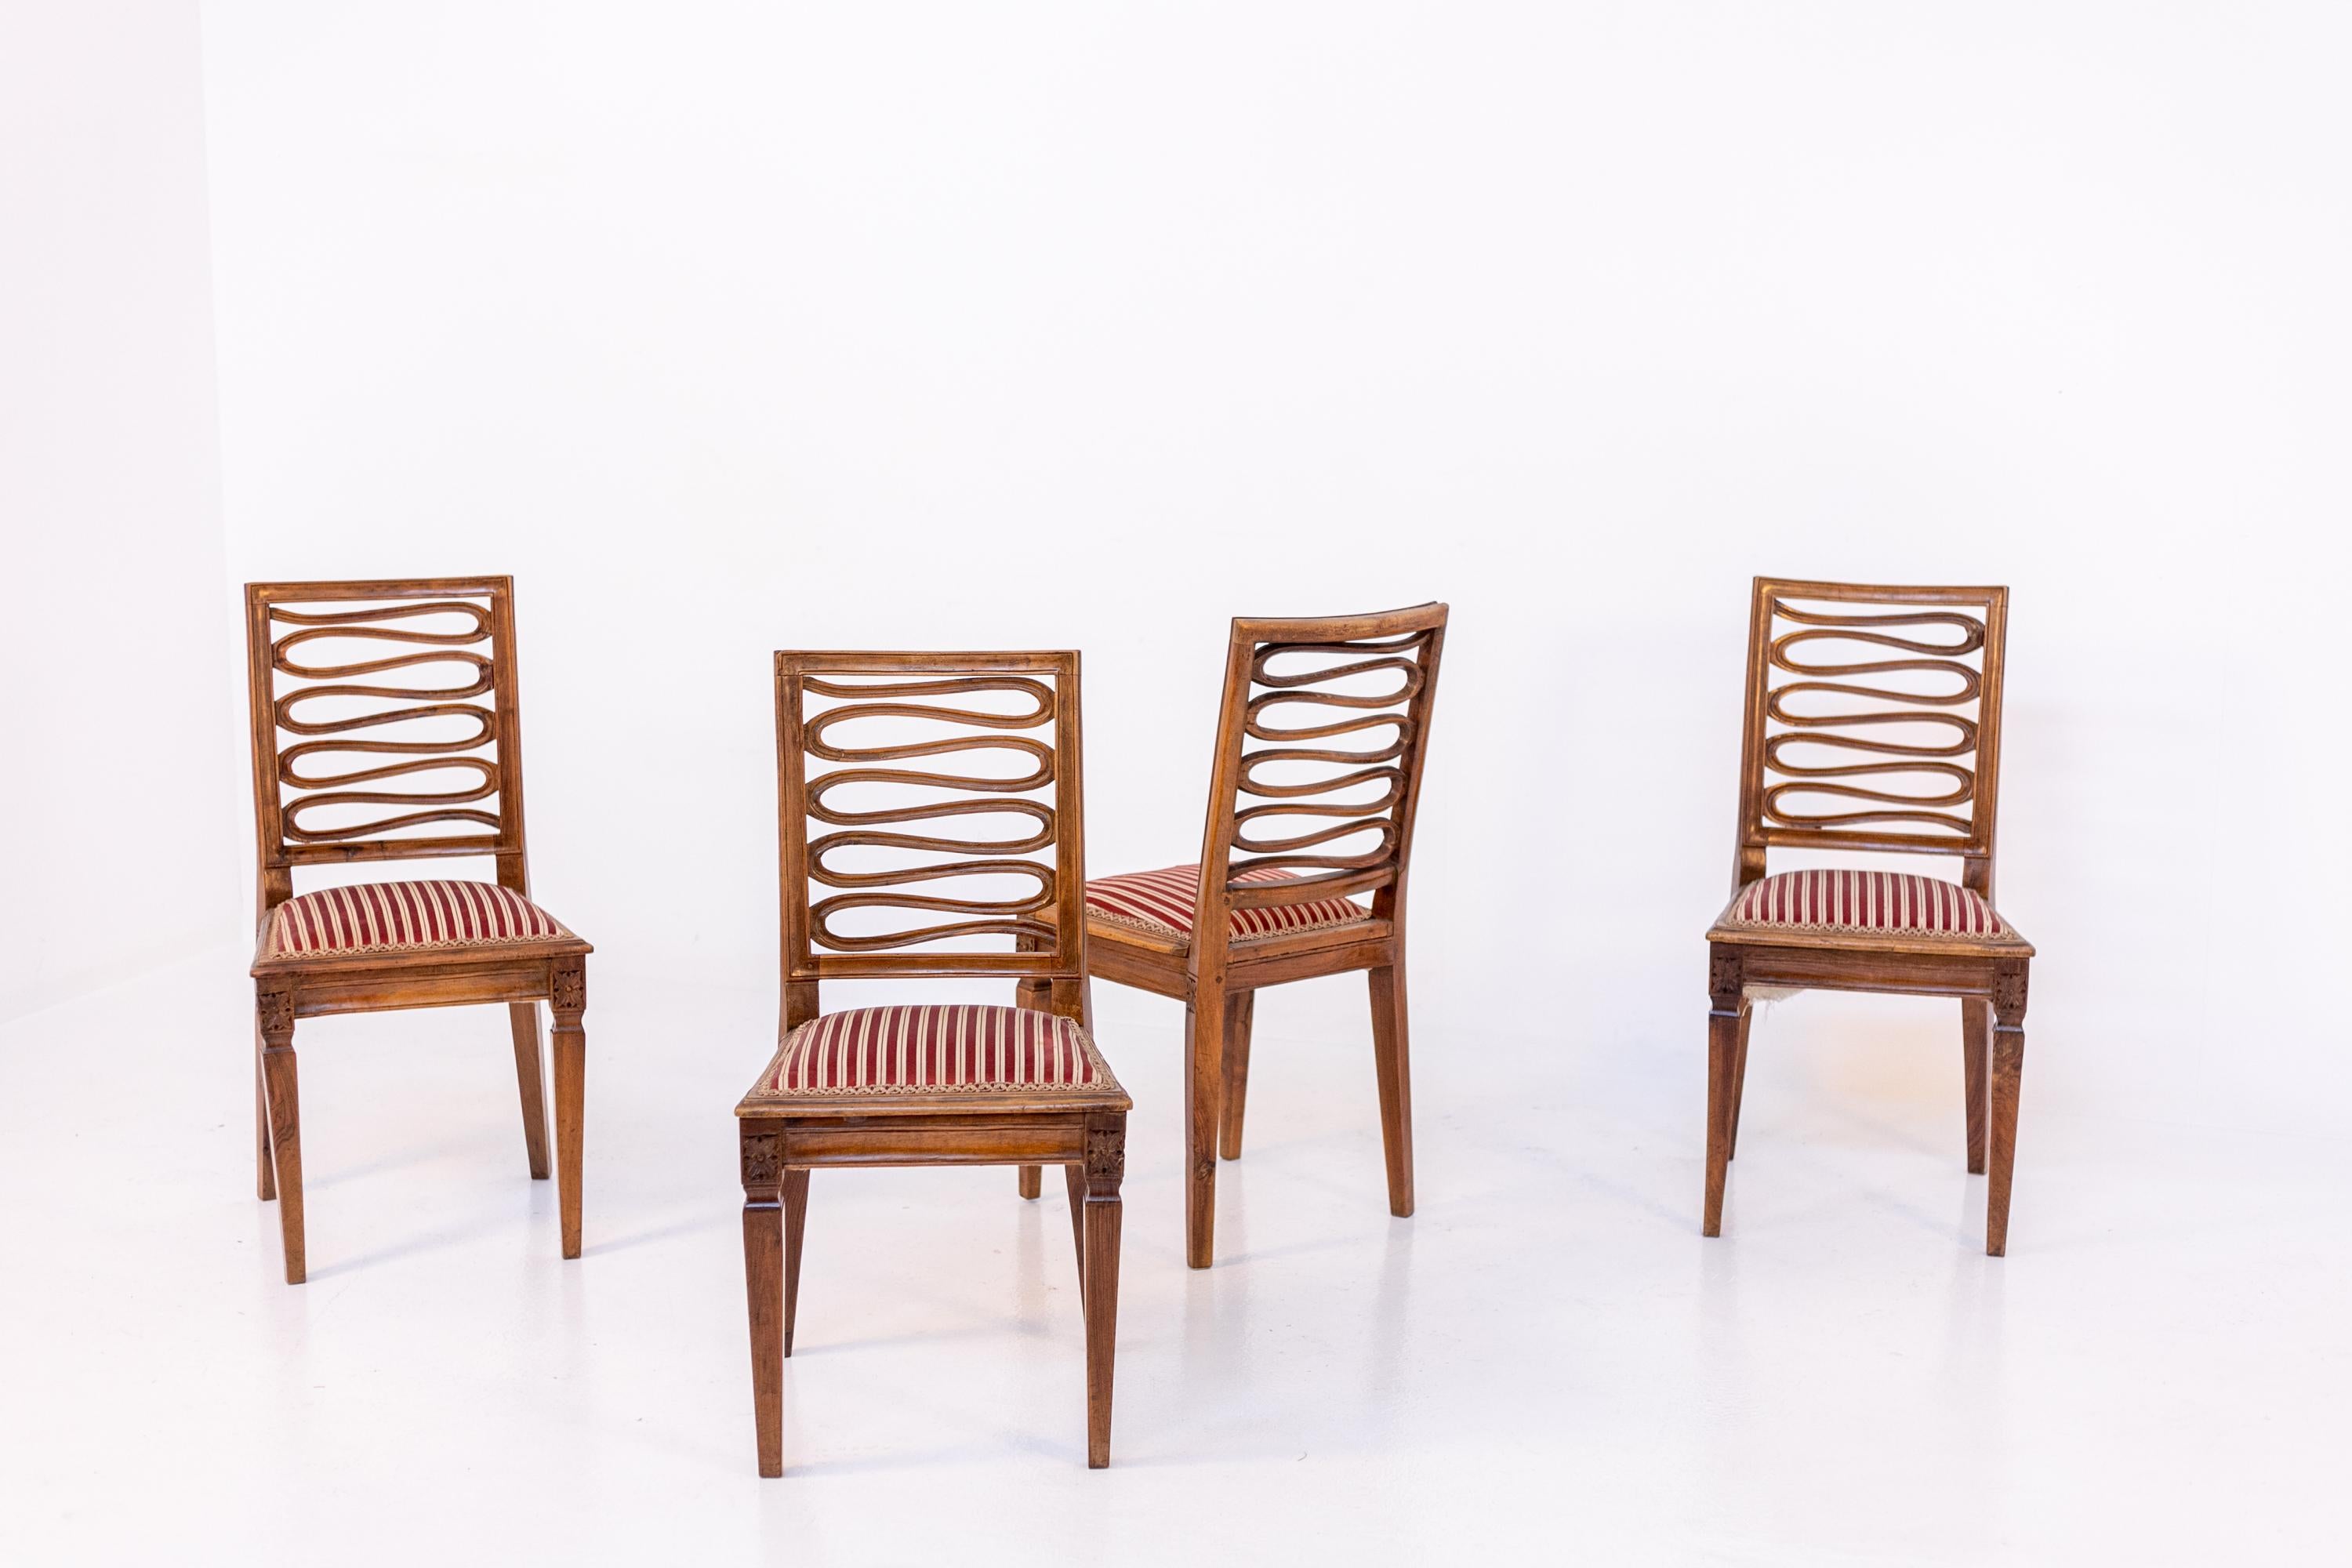 Set of four elegant Louis XVI wooden chairs original to the period in its original condition. The set is elegantly crafted from carved wood. The particularity of the chairs is its egregiously worked back. The back has a snake shape carved into the